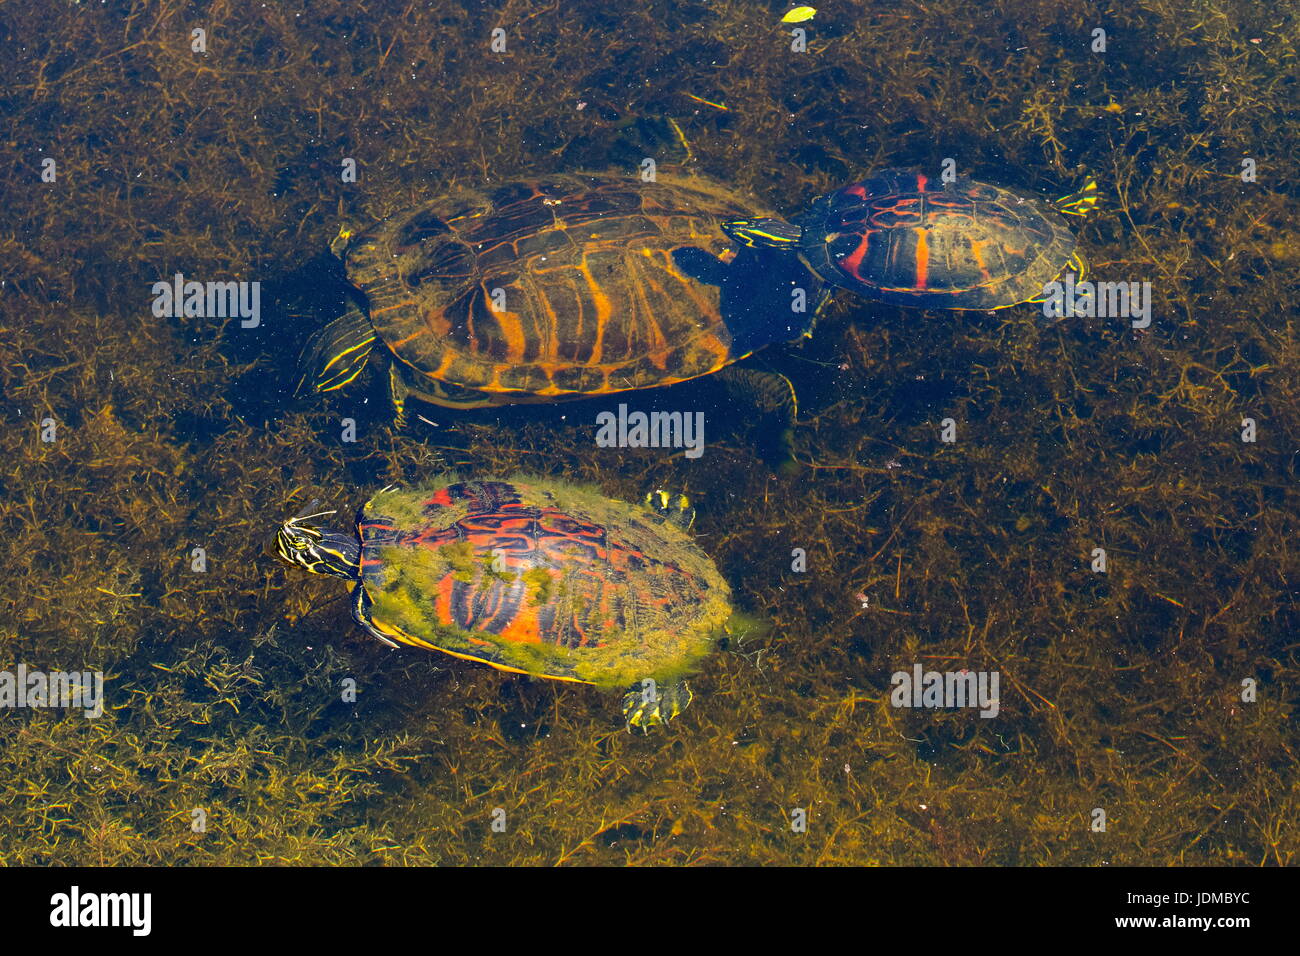 Florida red bellied cooters, Pseudemys nelsoni, on the surface of the water. Stock Photo